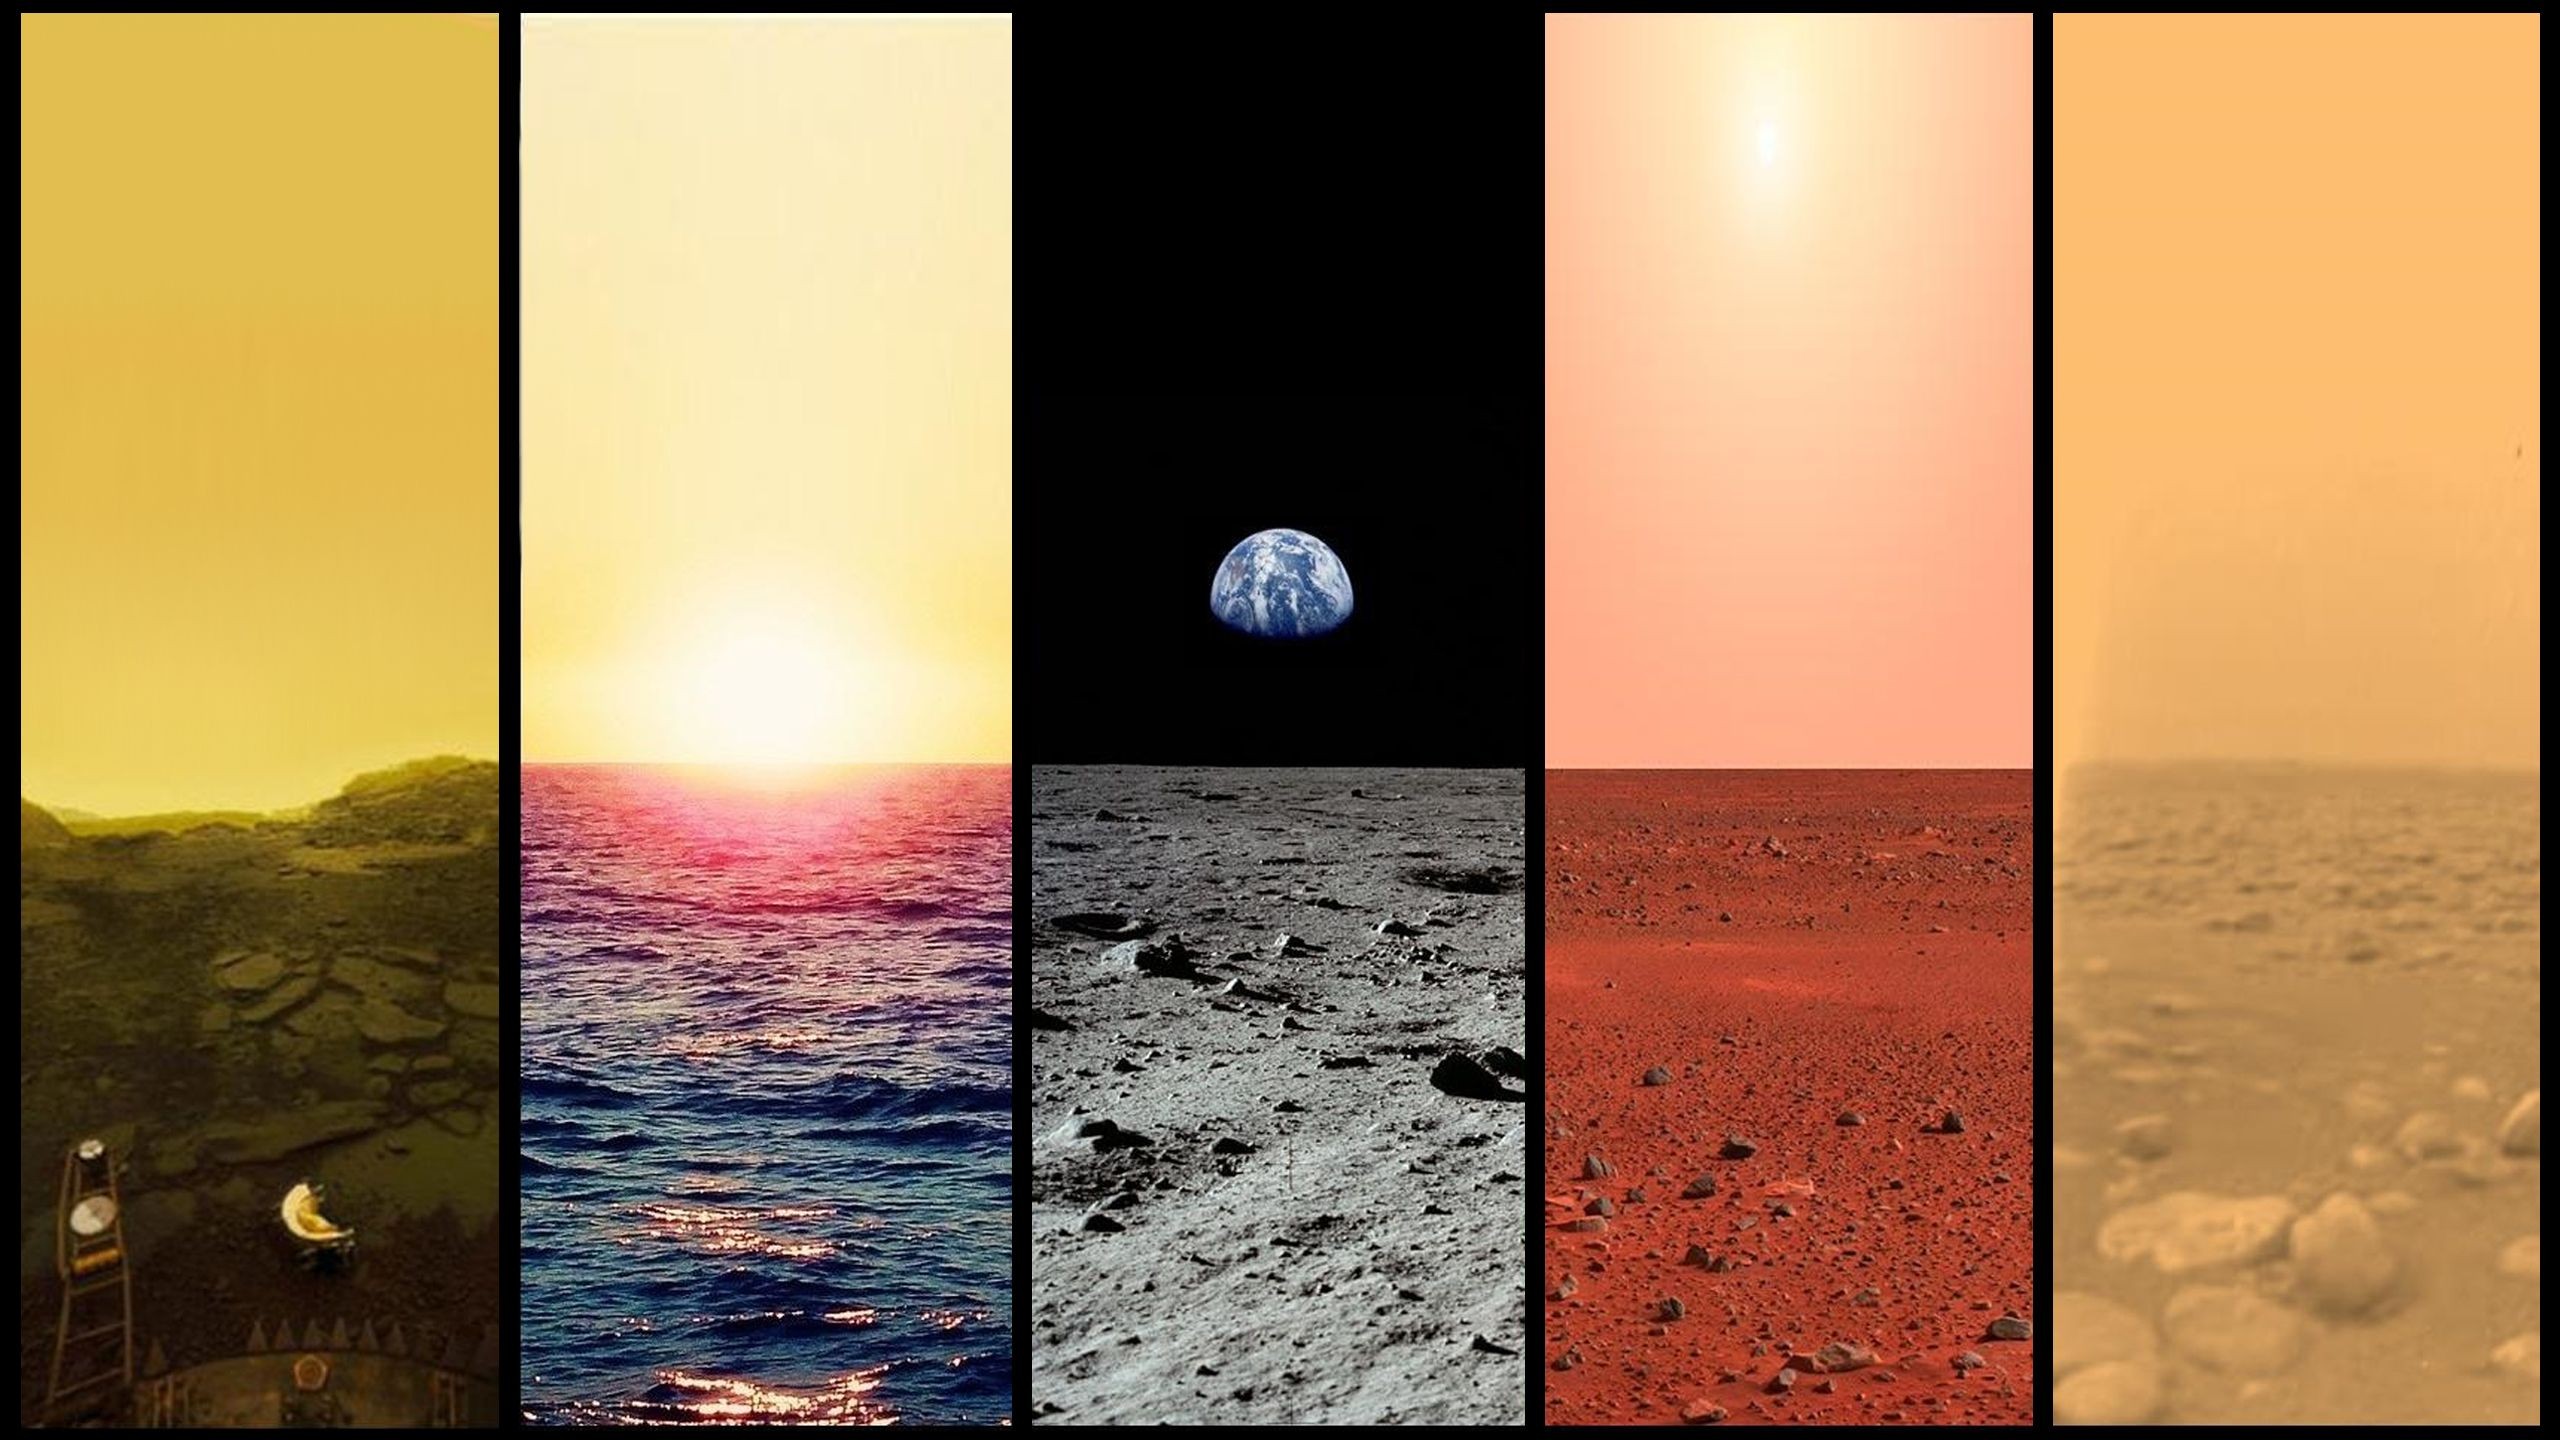 General 2560x1440 Earth space nature planet space art digital art collage panels